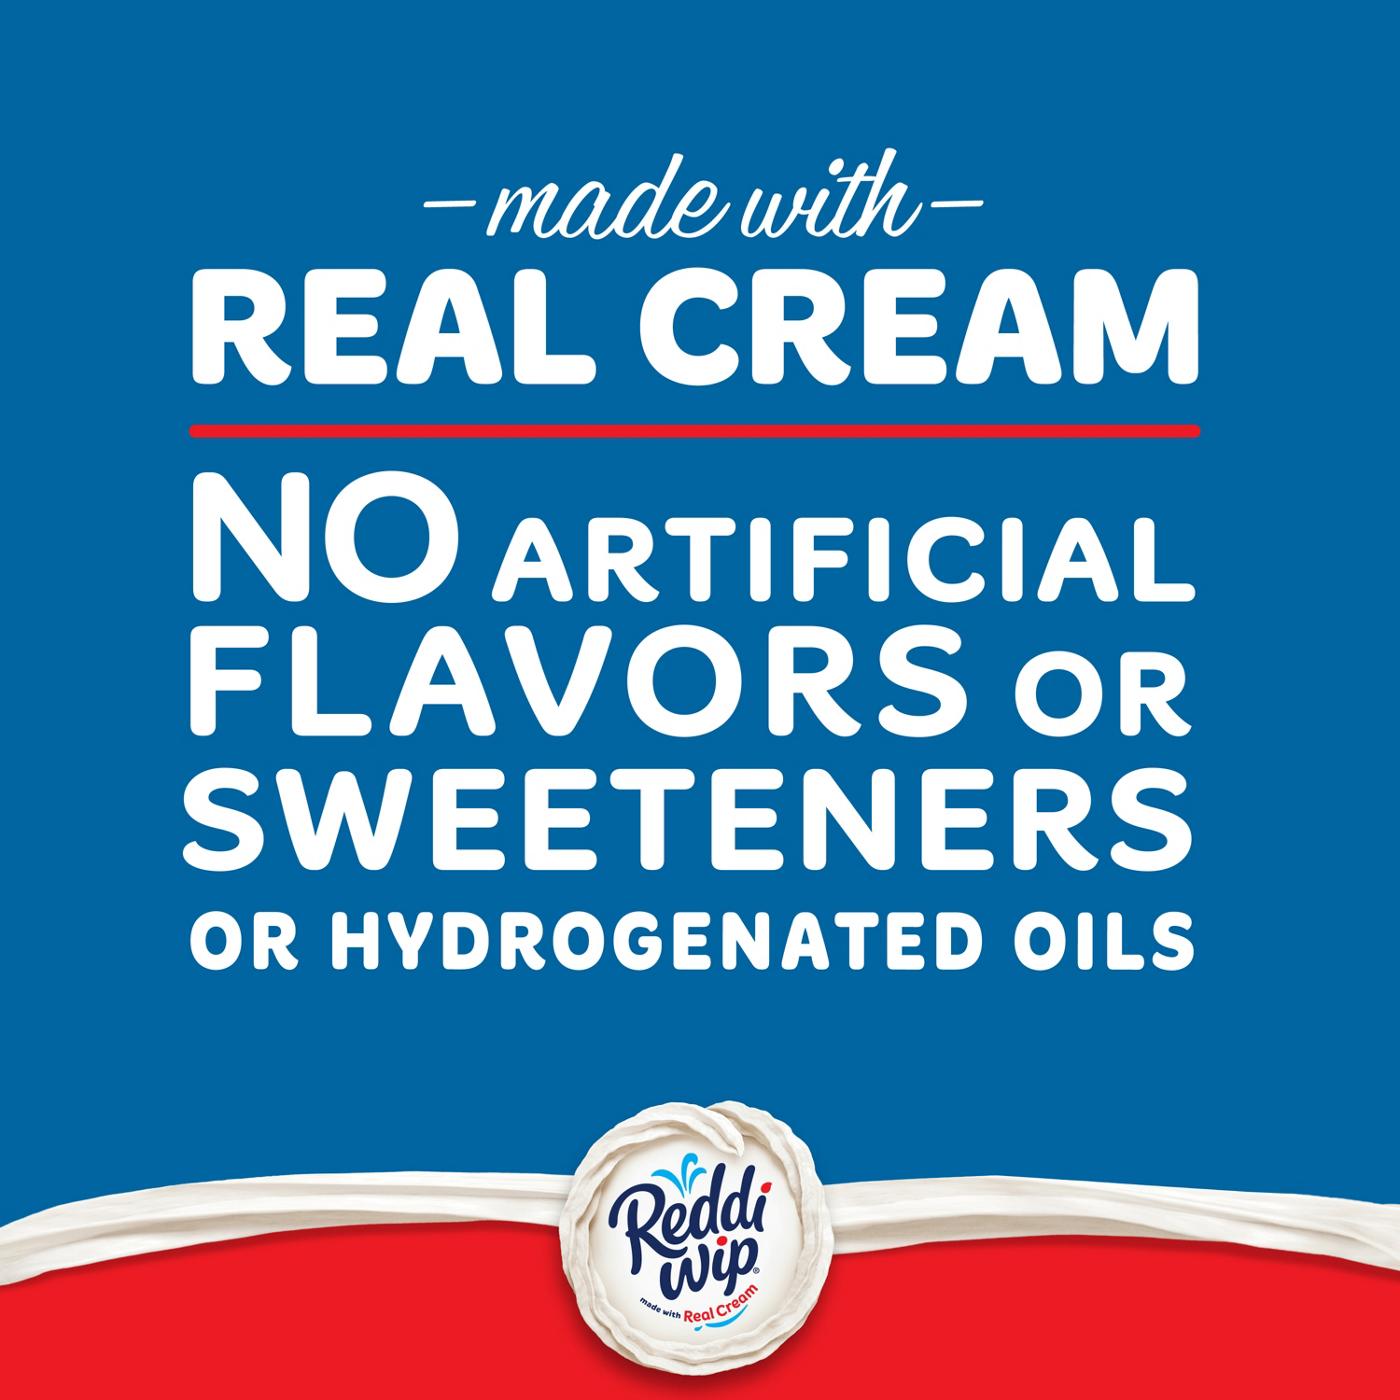 Reddi Wip Extra Creamy Whipped Topping Made with Real Cream; image 3 of 6